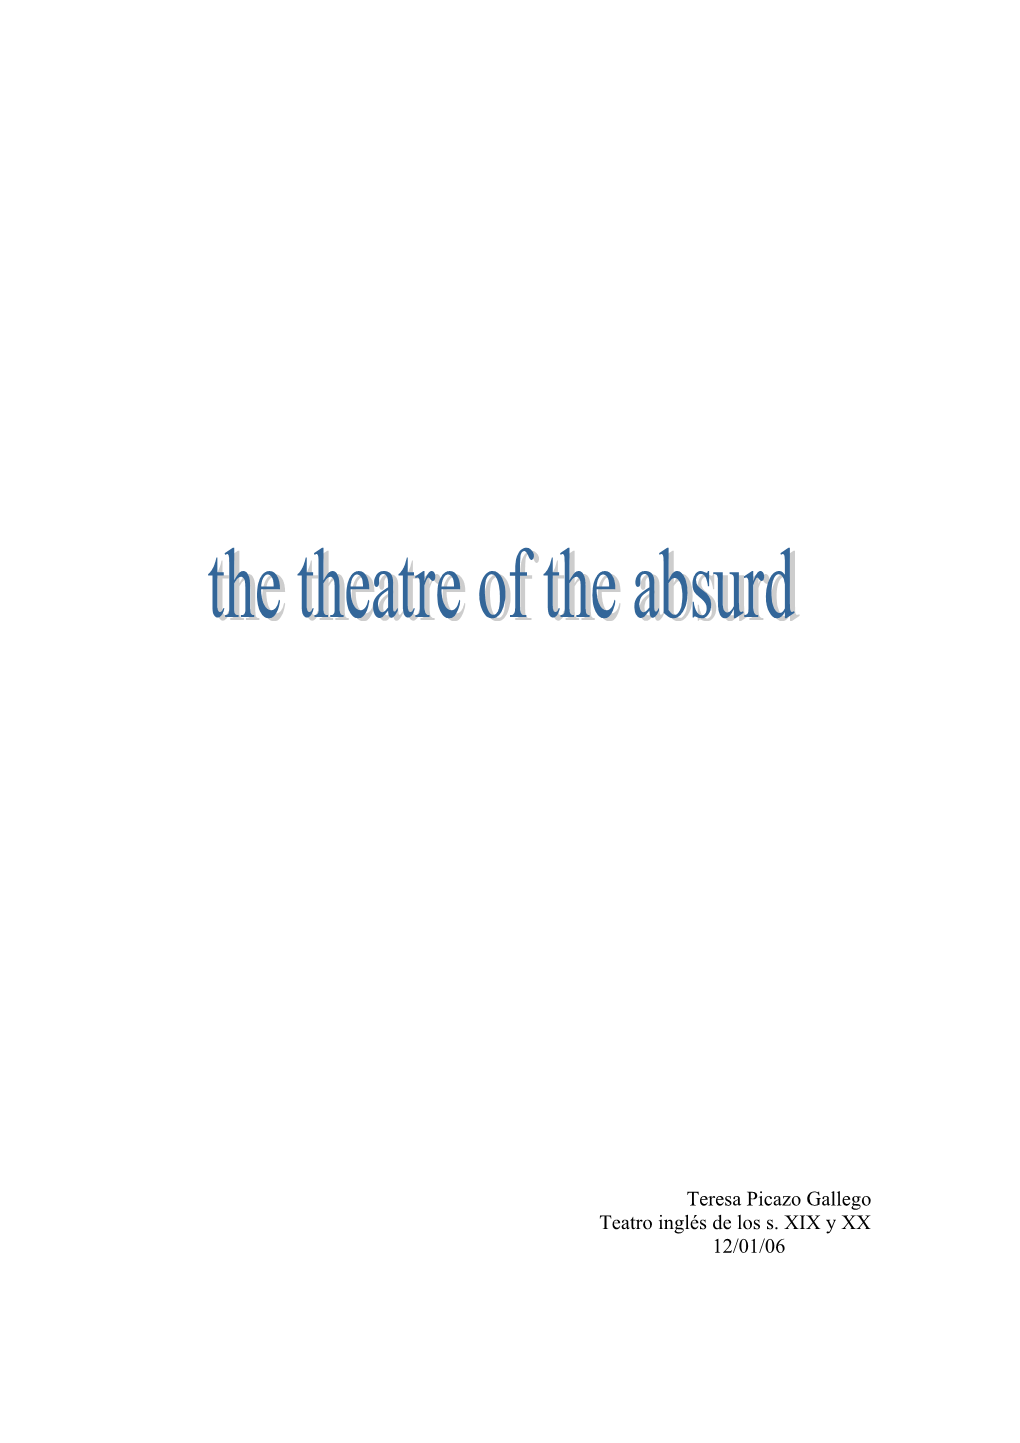 Analysis of a Theatre Curren: the Theatre of the Absurd